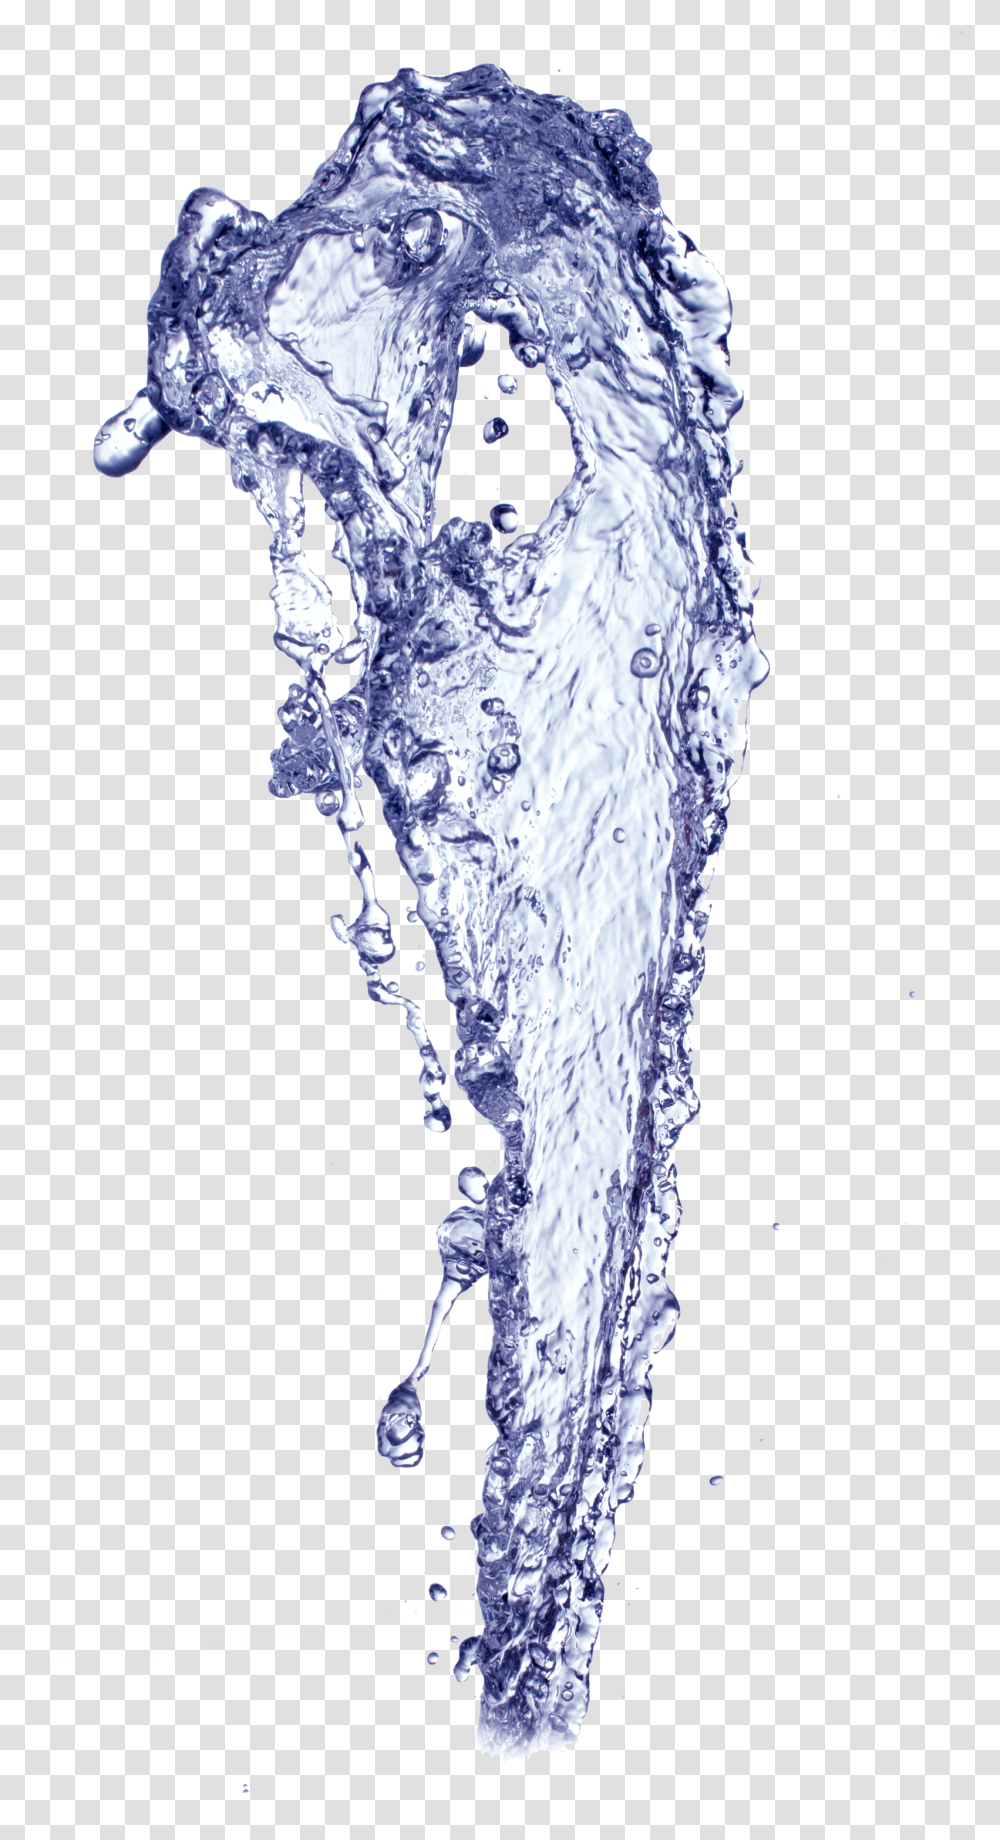 Water Images Water Splash Up, Ice, Outdoors, Nature, Droplet Transparent Png